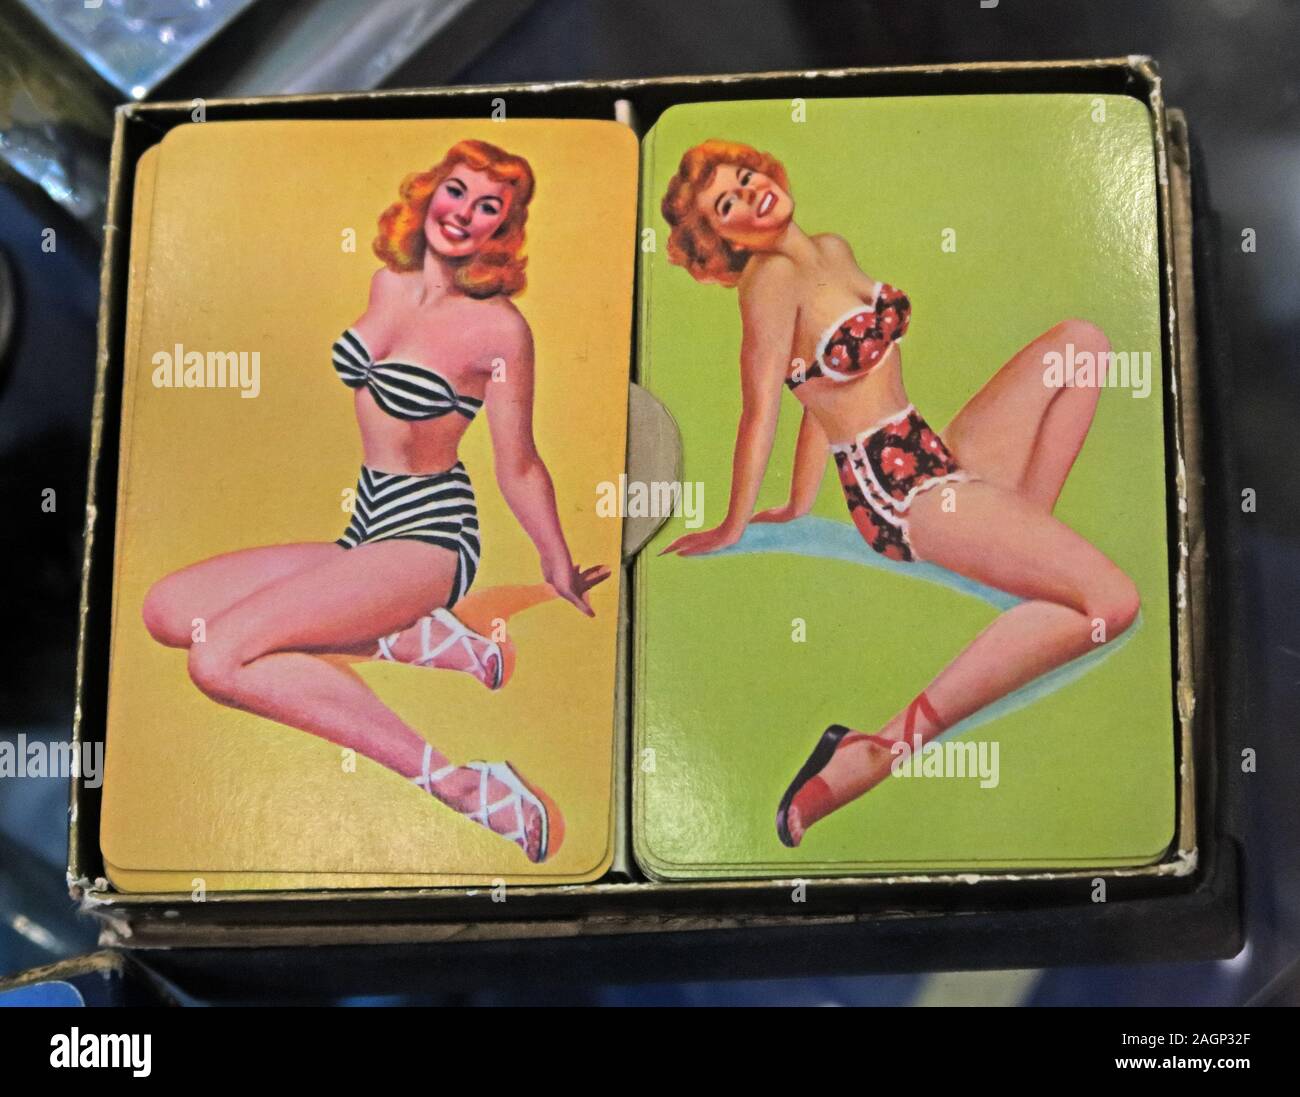 Pornographic Playing Cards, Sexy playing cards, Vintage playing cards,  glamour playing cards, Showgirl Vintage Set Poker Playing Cards Sexy Ladies  Stock Photo - Alamy